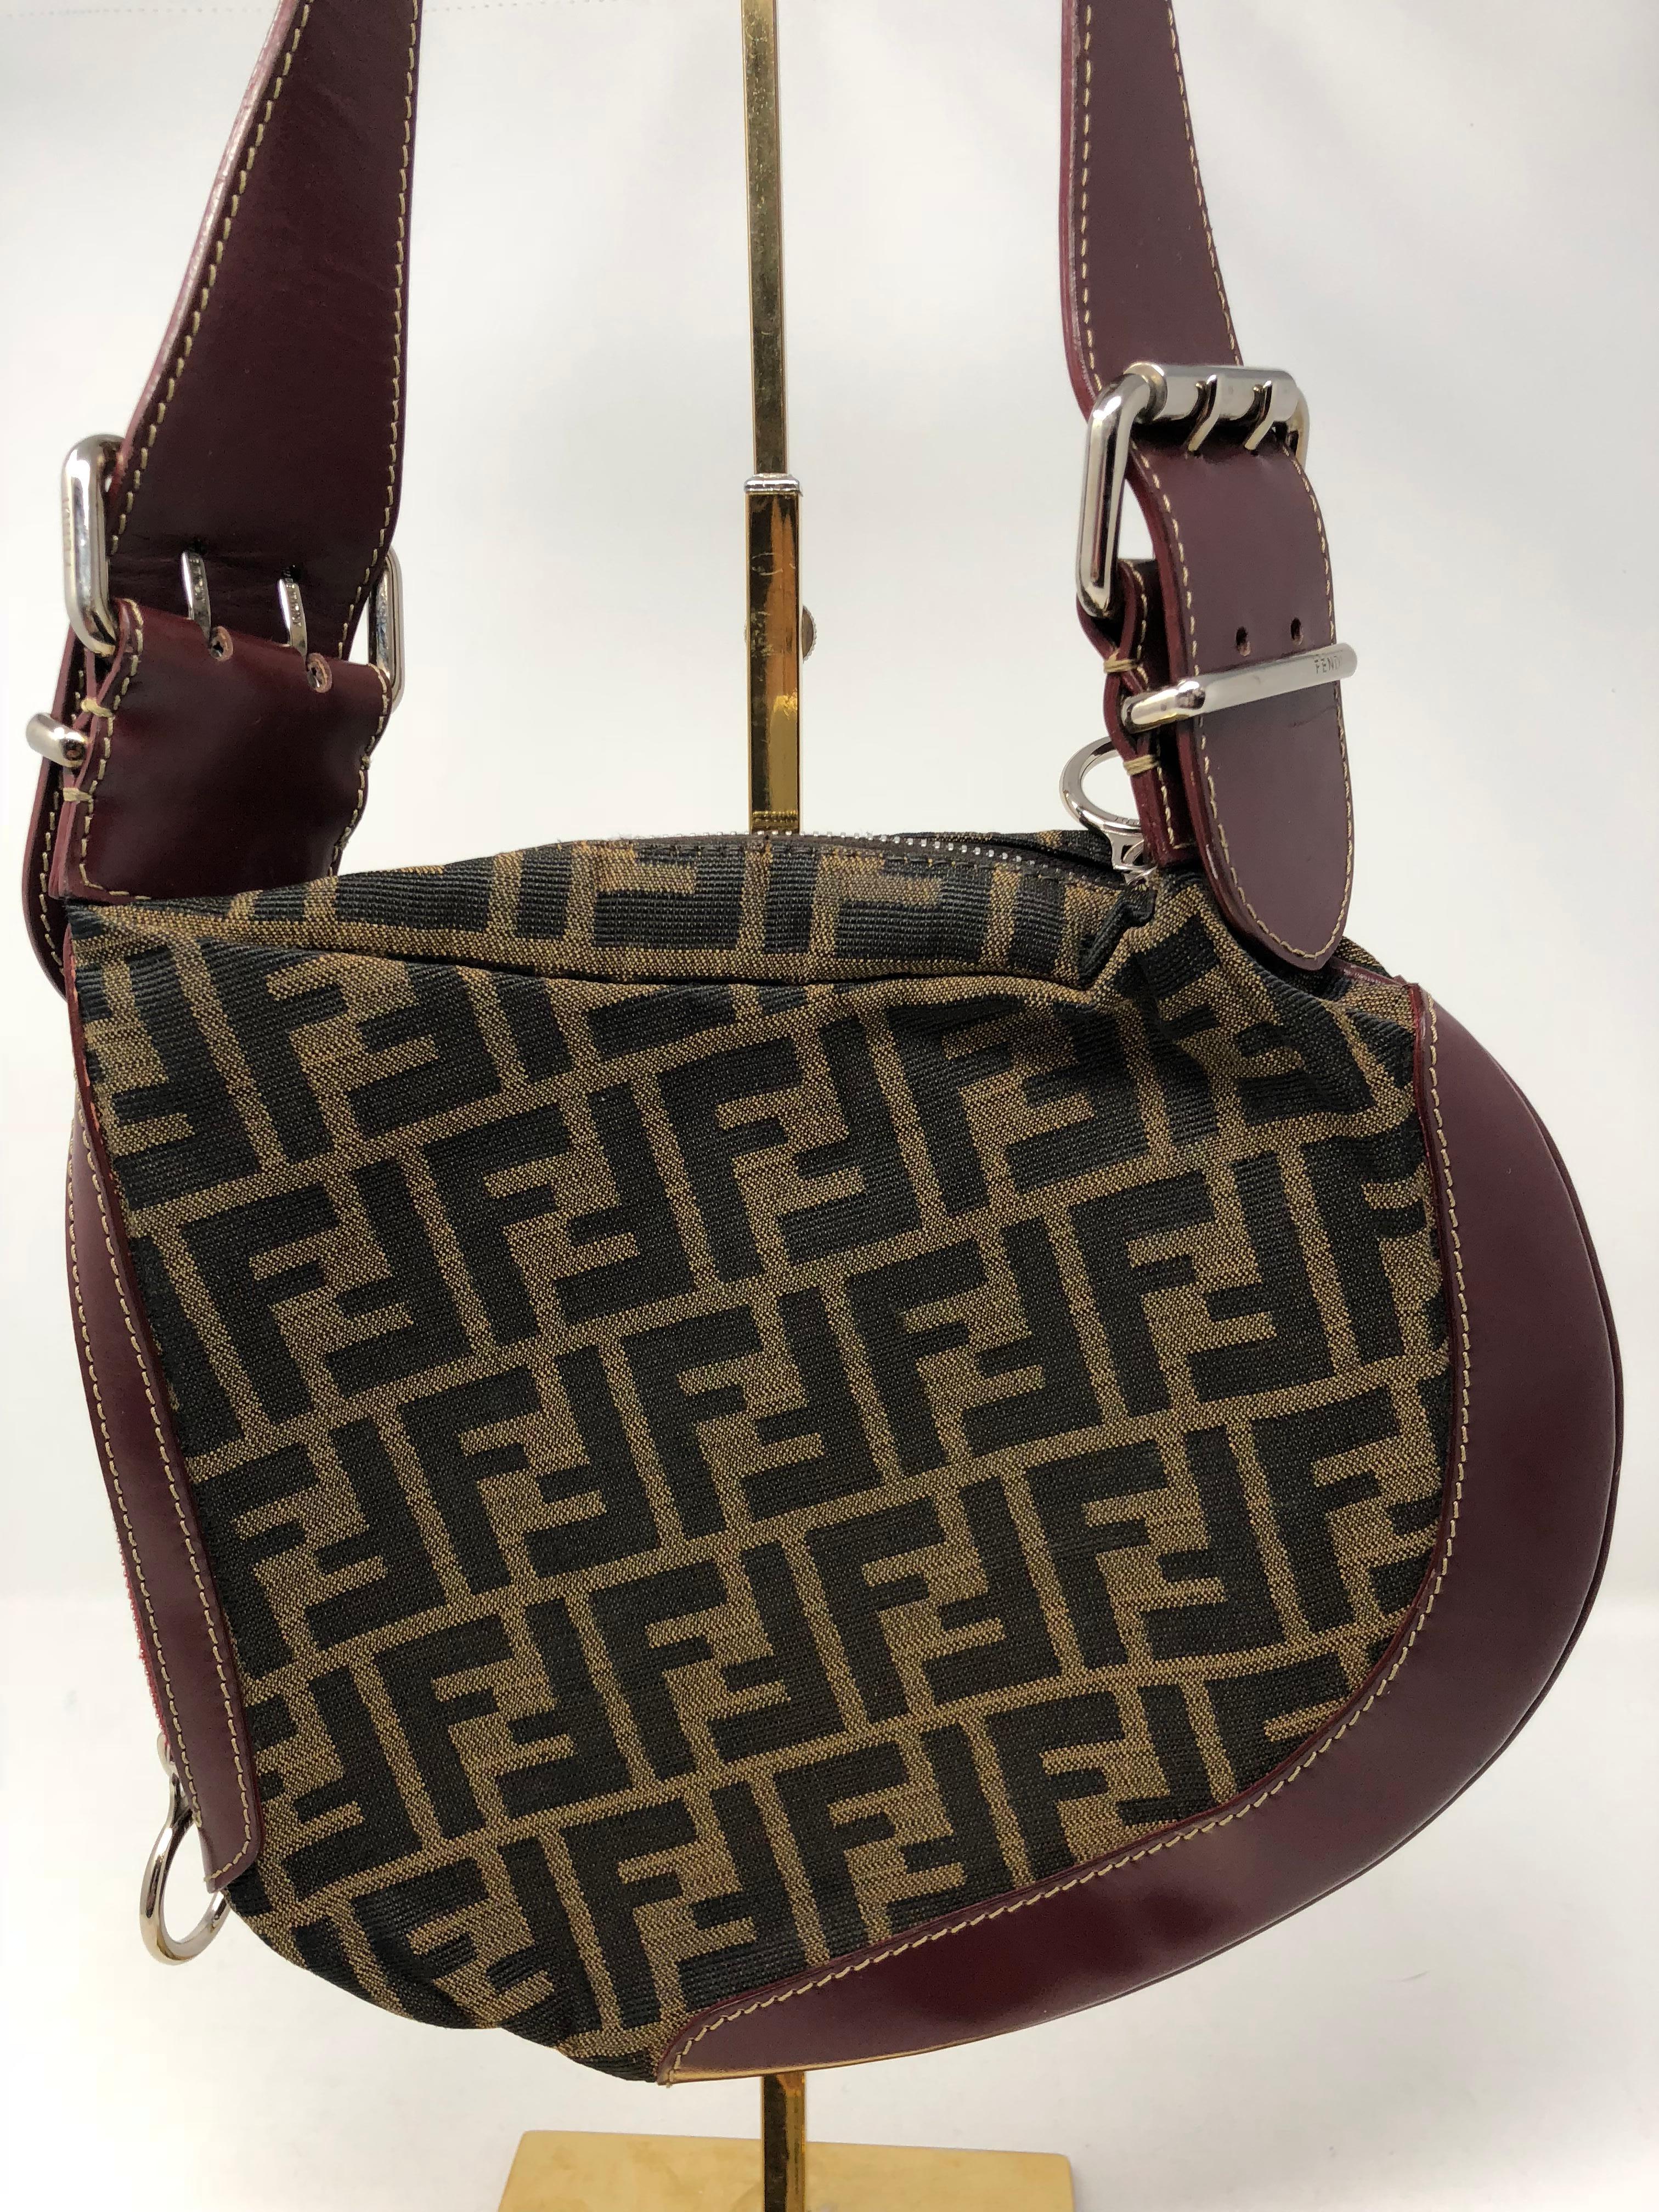 Fendi Monogram Saddle Bag with leather trim. Burgundy Leather handle and trim around the bag. Fendi Zucca print. Vintage Fendi bag in good condition. Fendi is back and so is this style. Guaranteed authentic. 